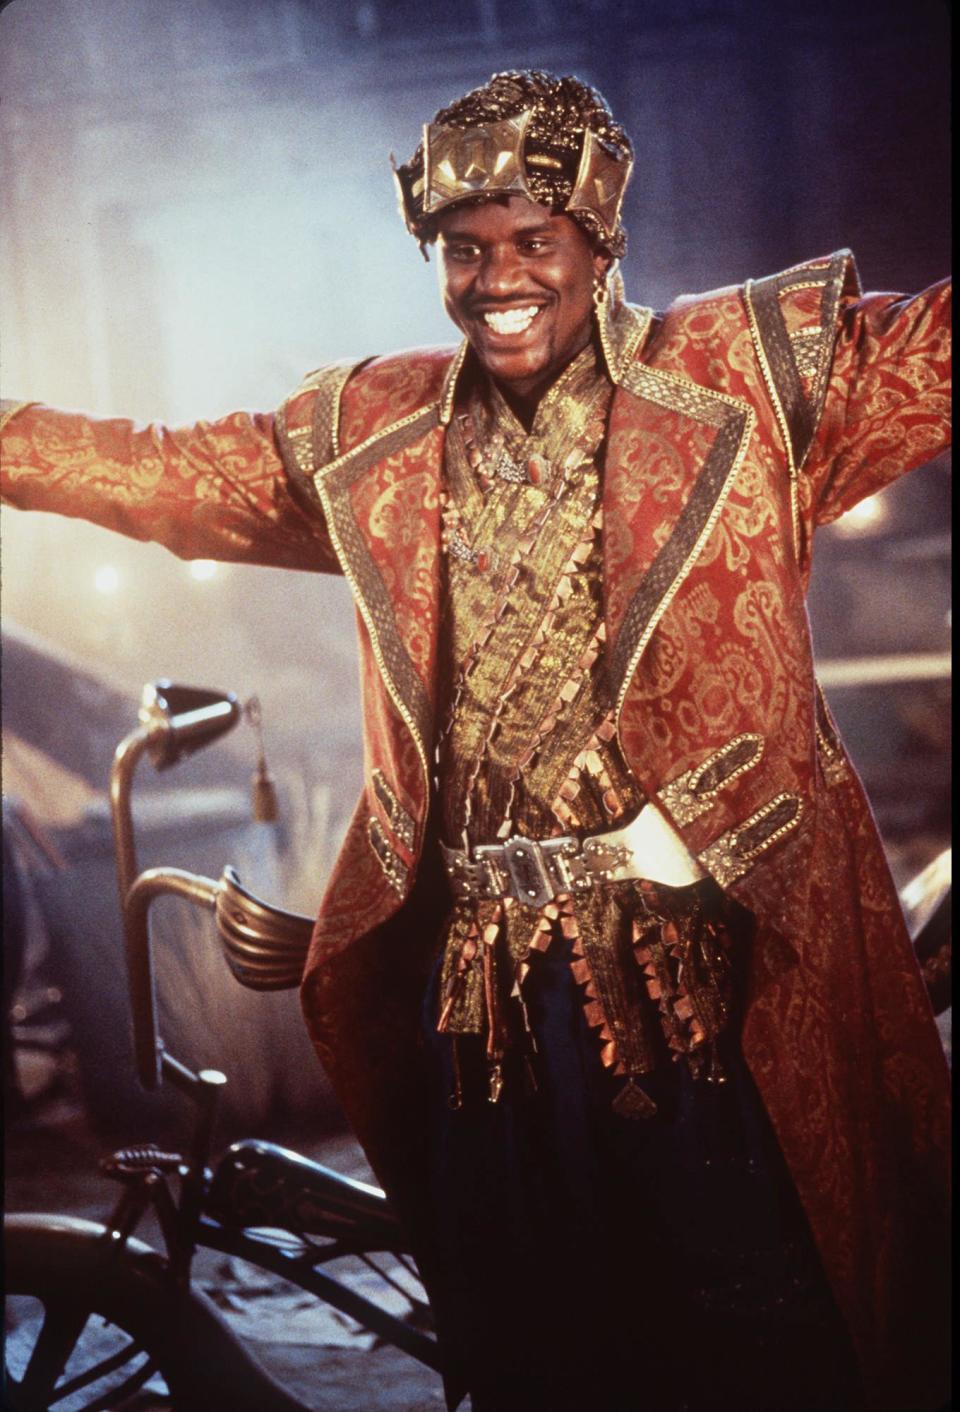 -

-FILE--Basketball star Shaquille O'Neal is shown in a scene from the film, "Kazaam." O'Neal, who commanded a behemoth $120 million, seven-year deal with the Los Angeles Lakers, also happens to be the heftiest of their distinguished line of big men, carrying 320 pounds on his 7-foot, 1-inch frame. "The Los Angeles Lakers have acquired a 24-year-old superstar, who we feel is going to bring us back to that incredible level that this franchise has enjoyed in Los Angeles," Lakers executive Jerry West said Wednesday July 17, 1996. (AP Photo/Touchstone Pictures, HO)